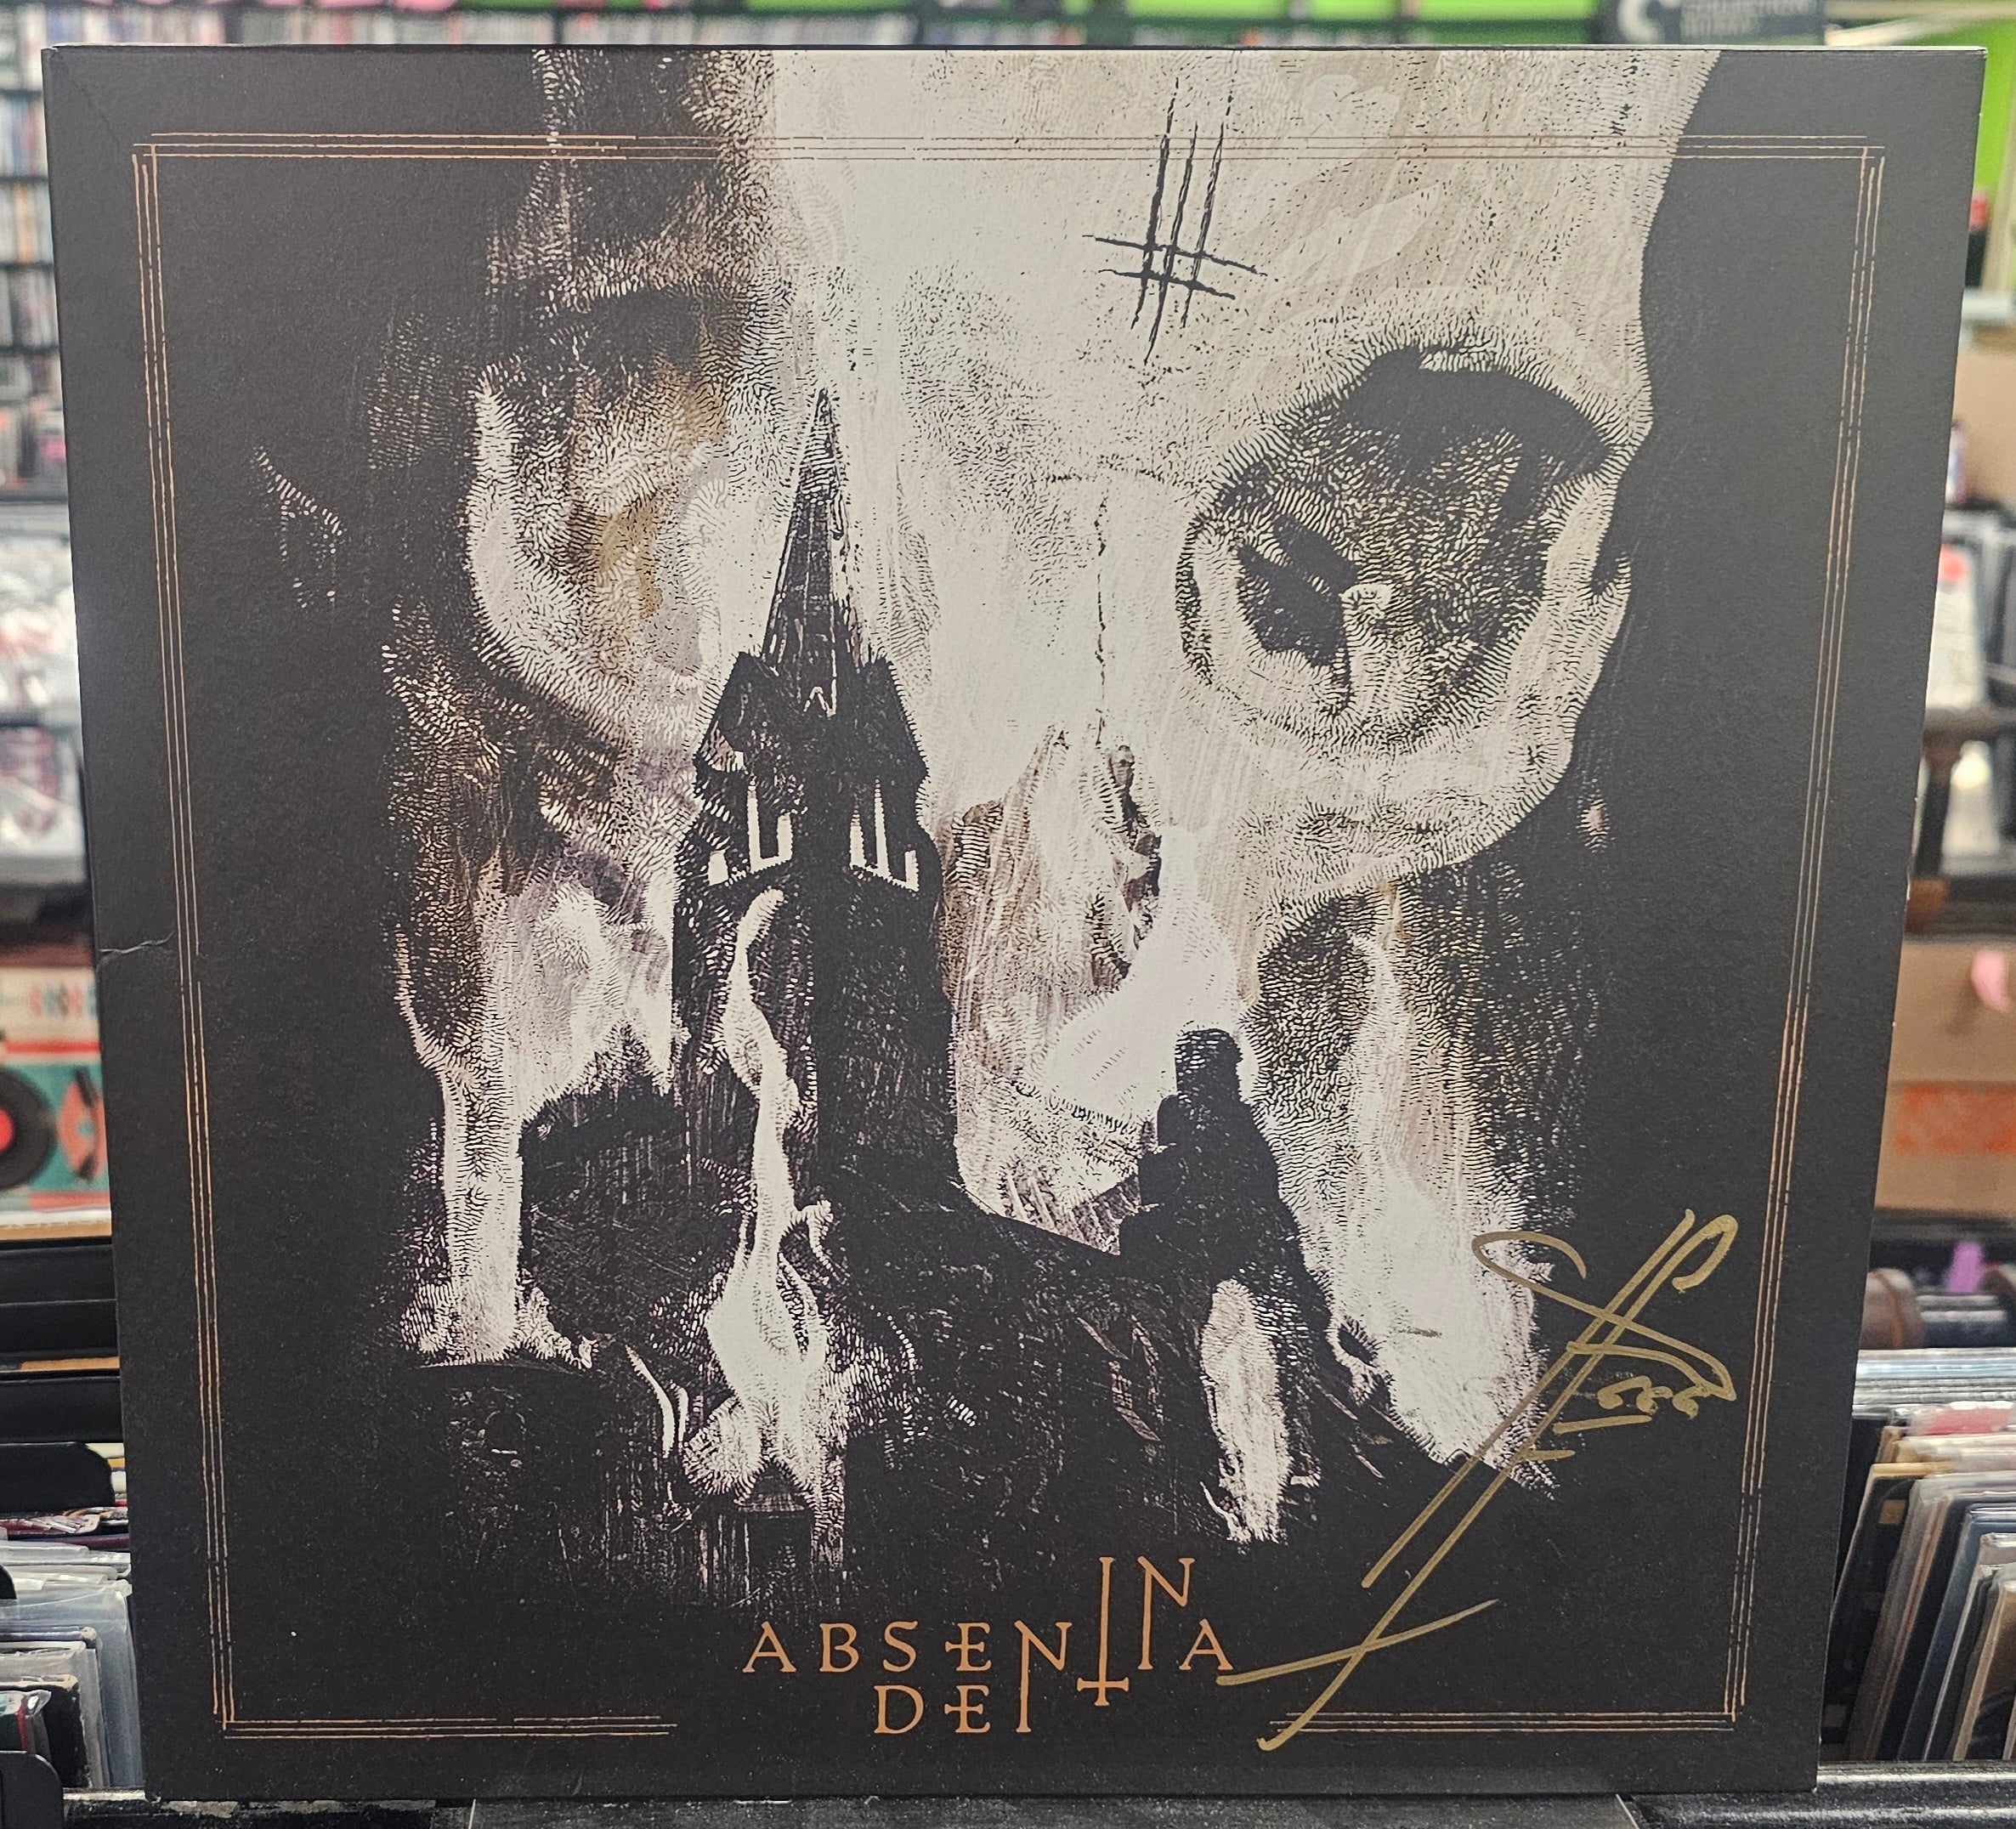 Behemoth- In Absentia Dei (Inferno Variant [Light Brown/ Green/ Black Marbled])(Signed)